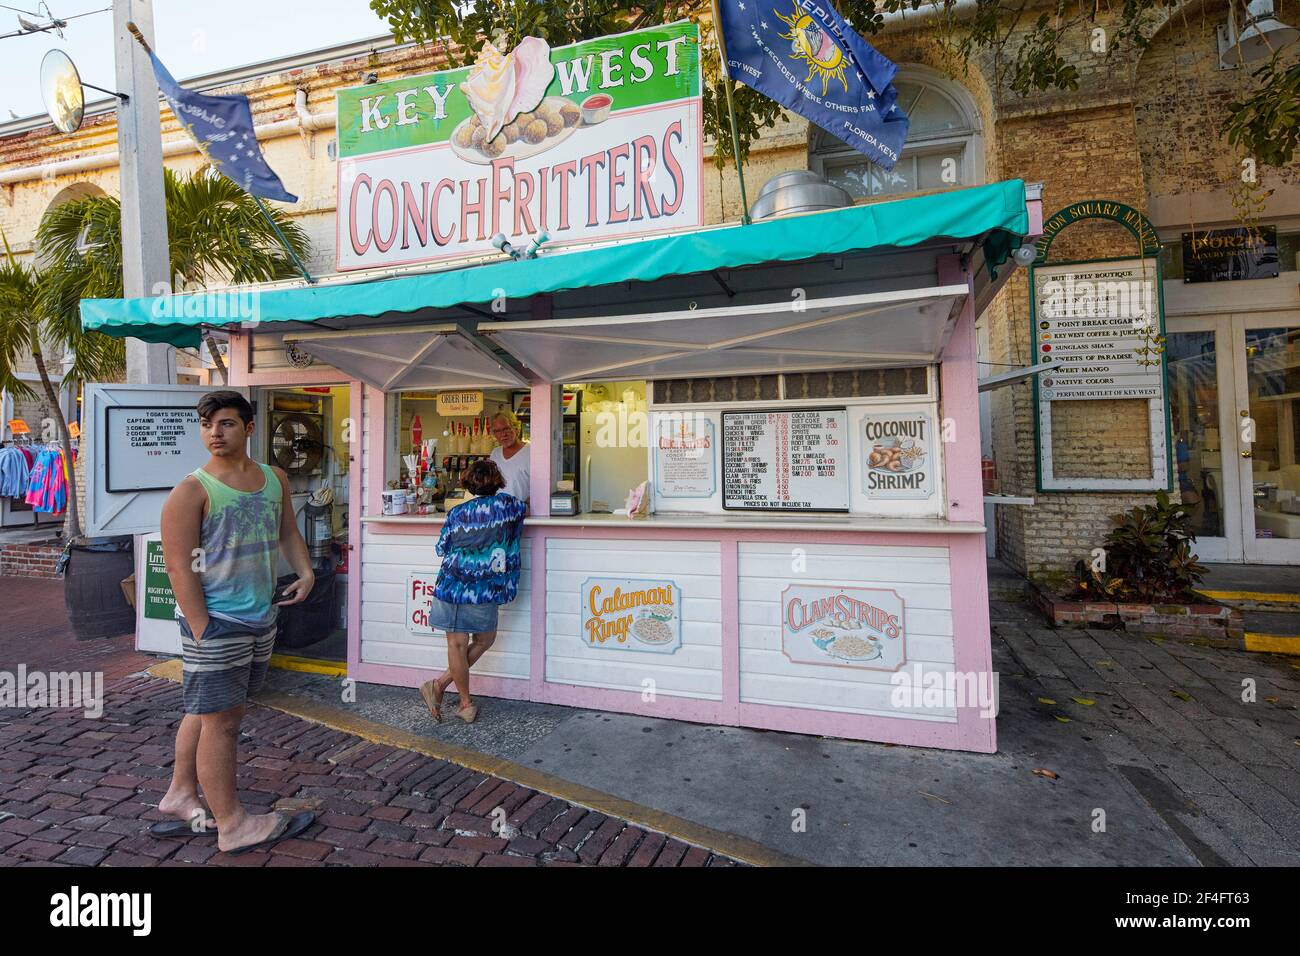 Key West Conch Fritters a Key West Florida USA Foto Stock